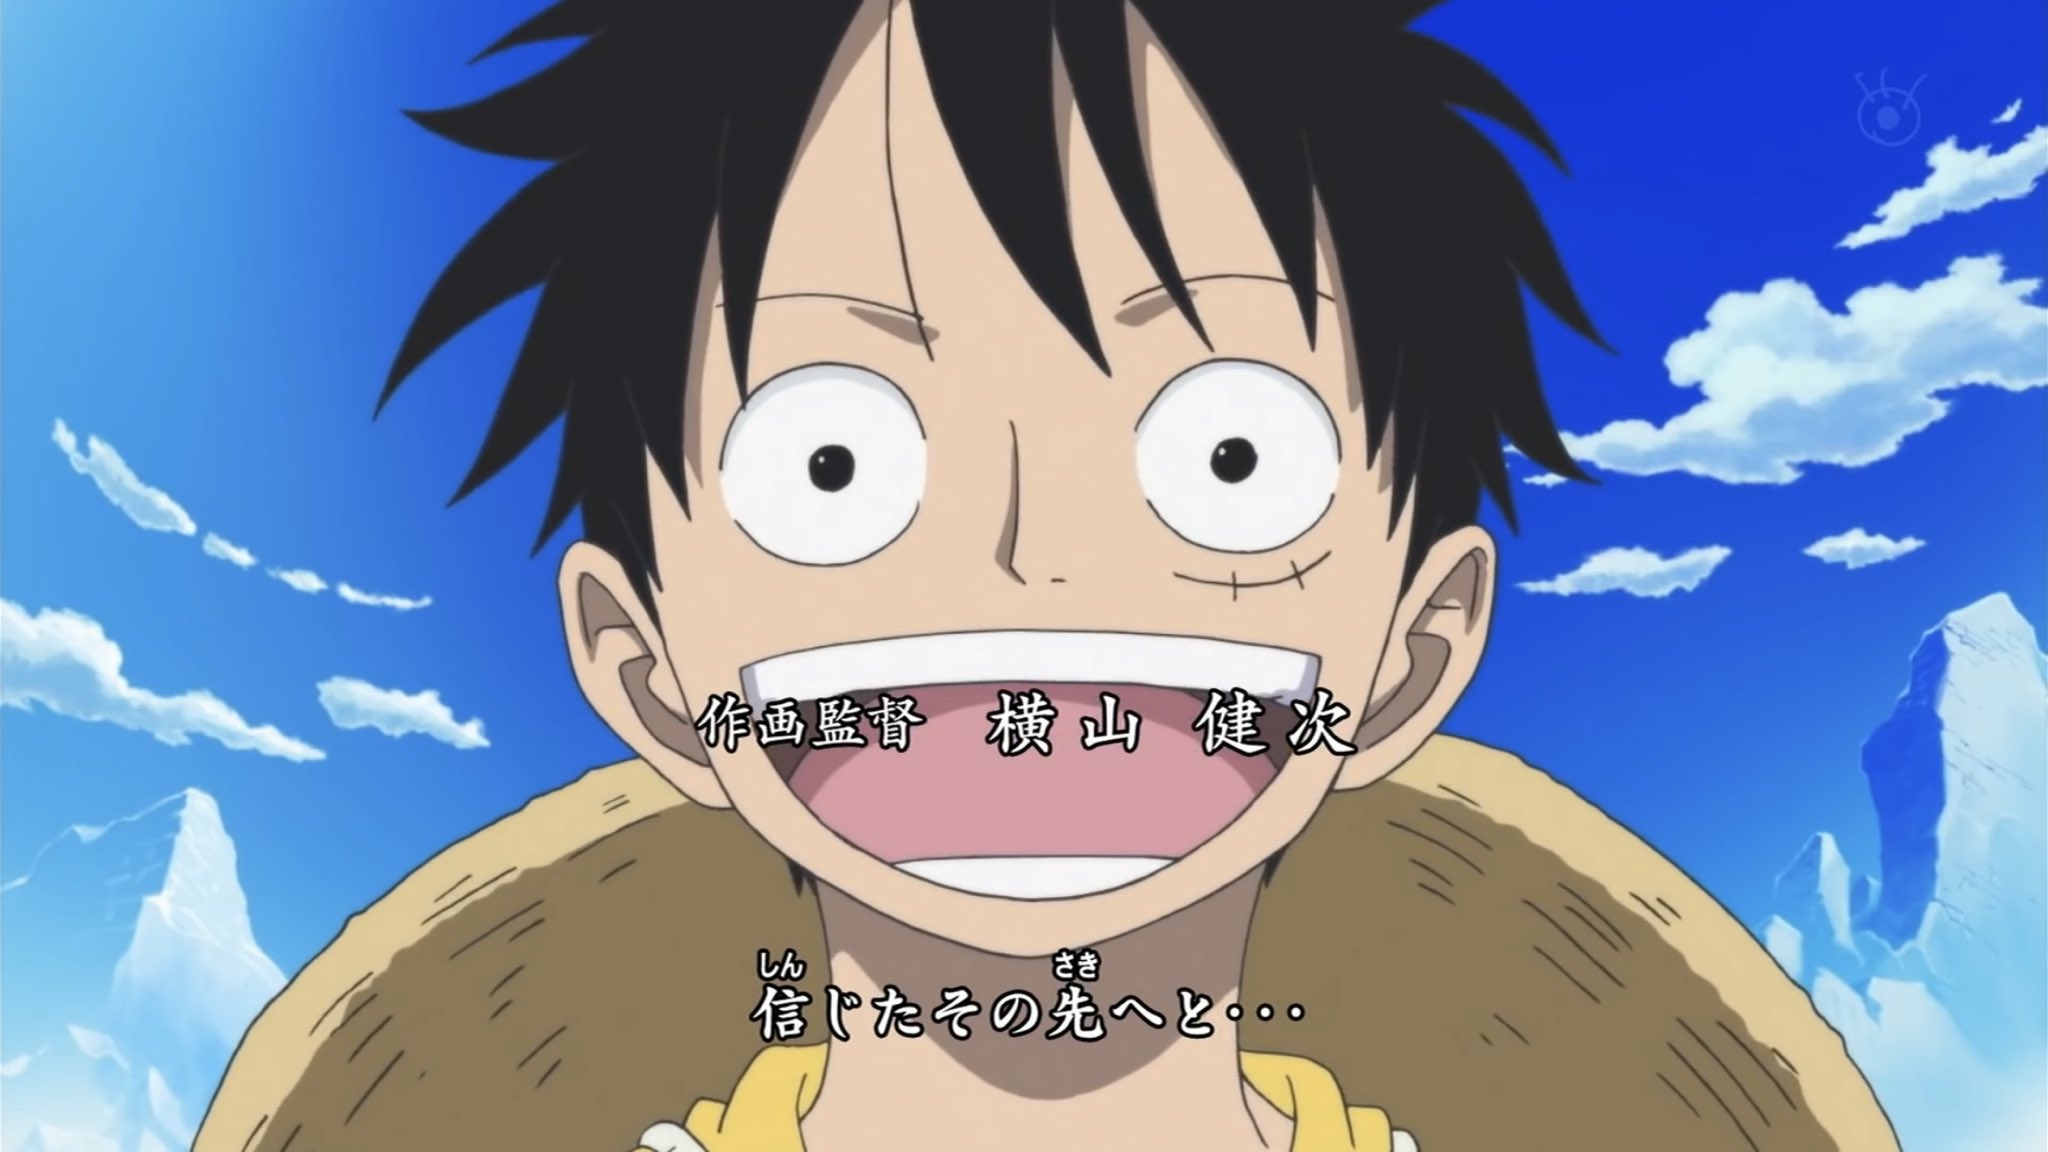 Isa Reassistindo Op One Piece Opening 13 Onepiece Oneday Animeopening T Co 9rtdusw4hd Twitter